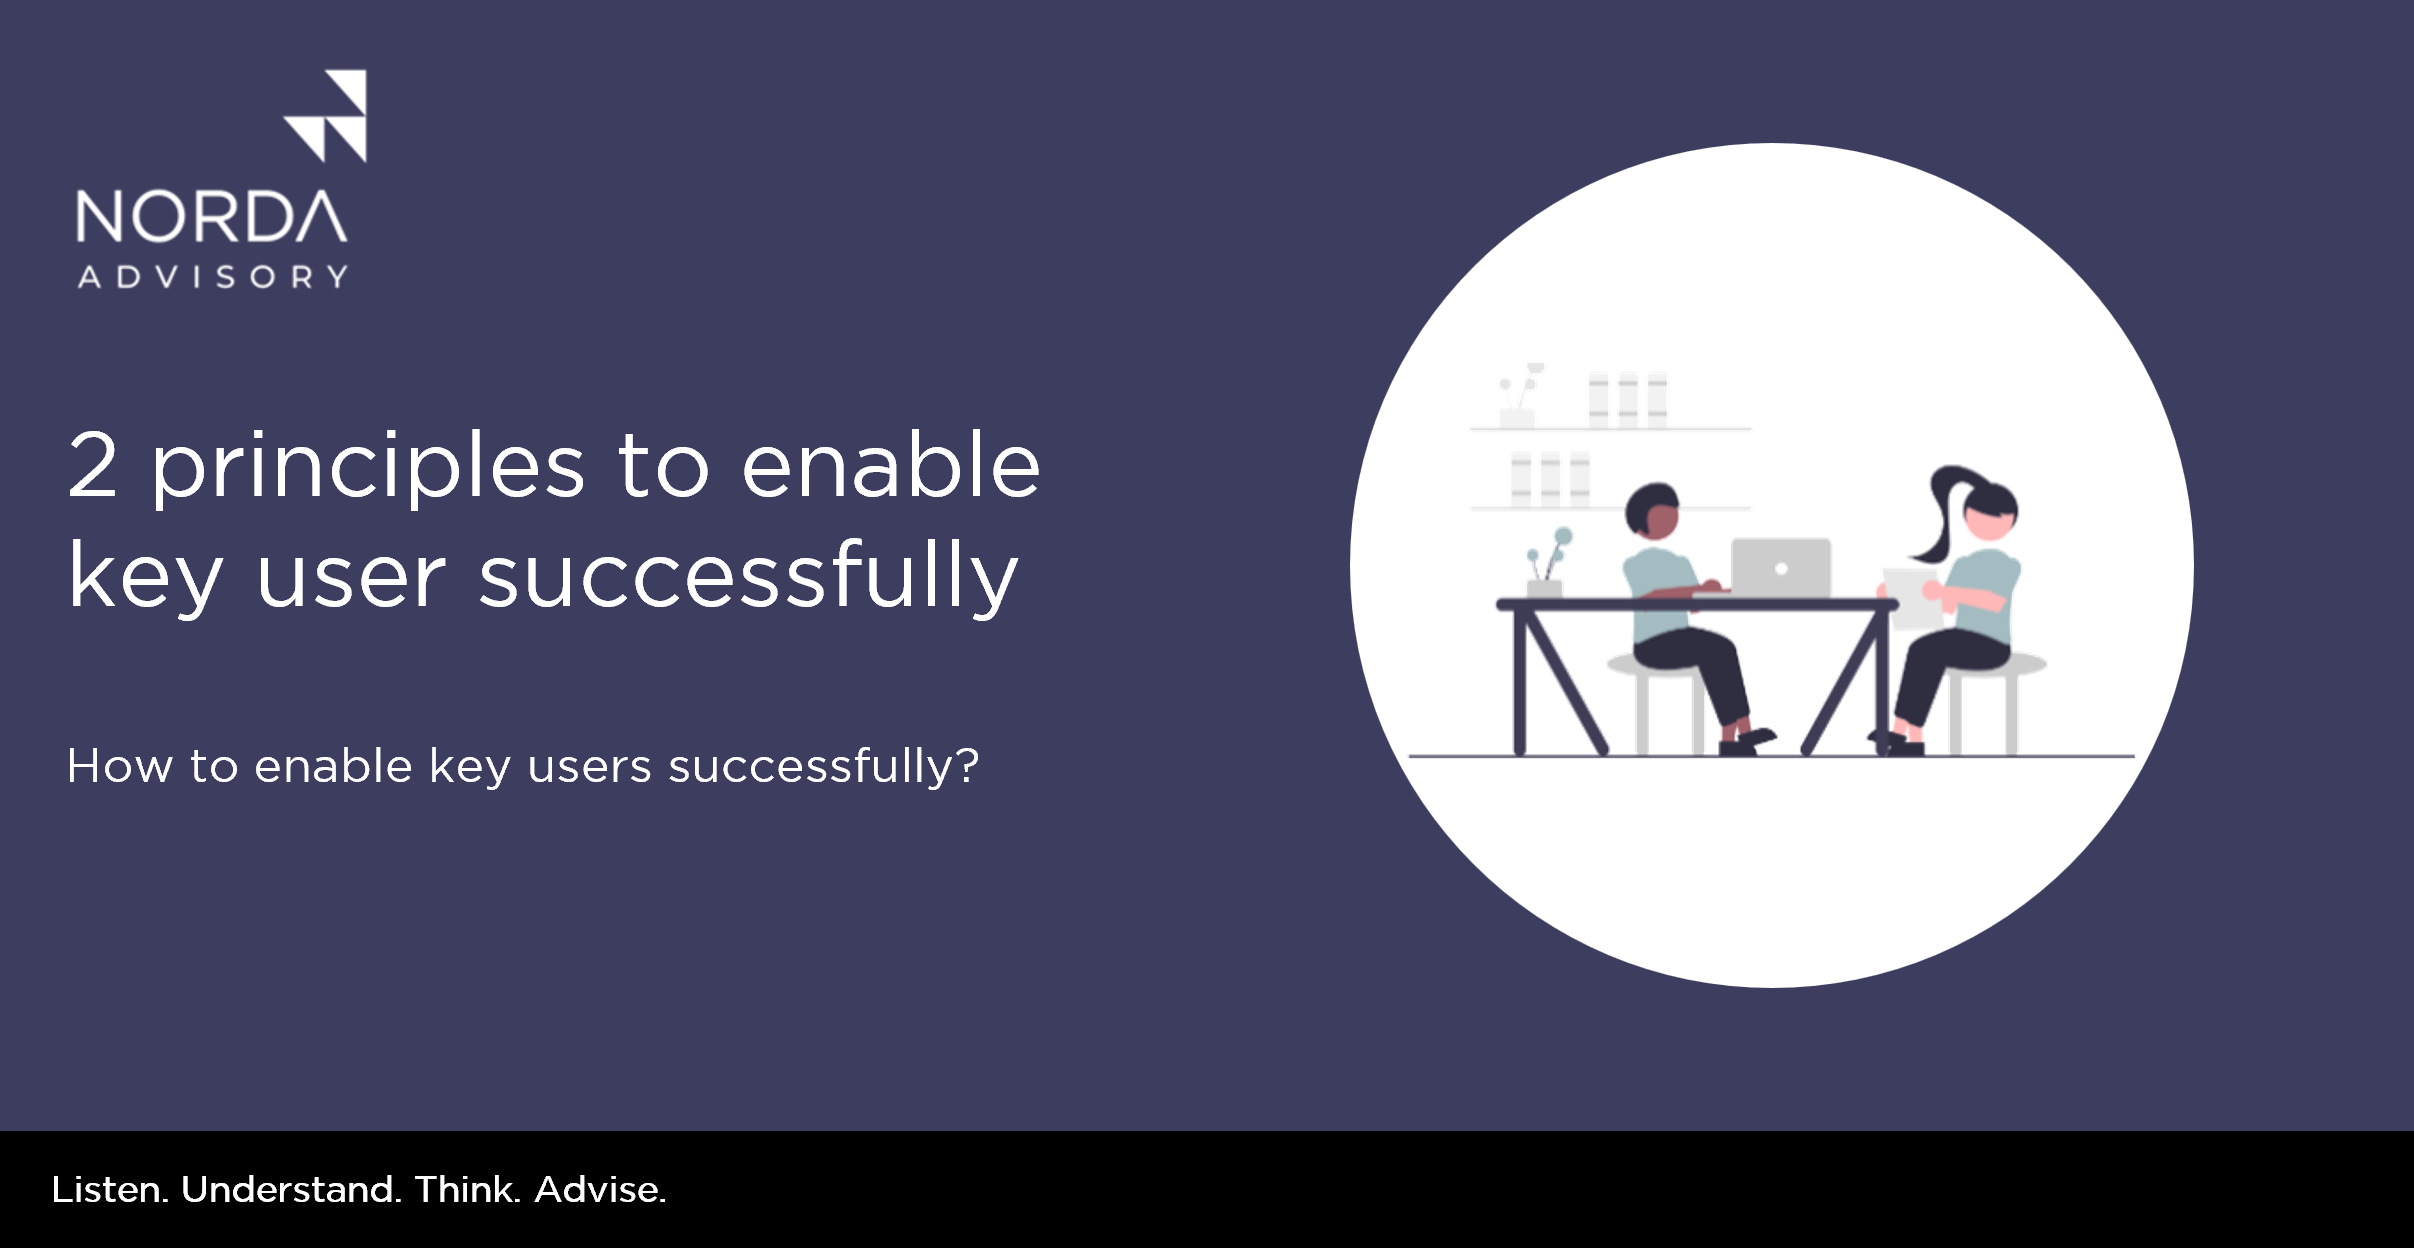 2 principles to enable key users successfully